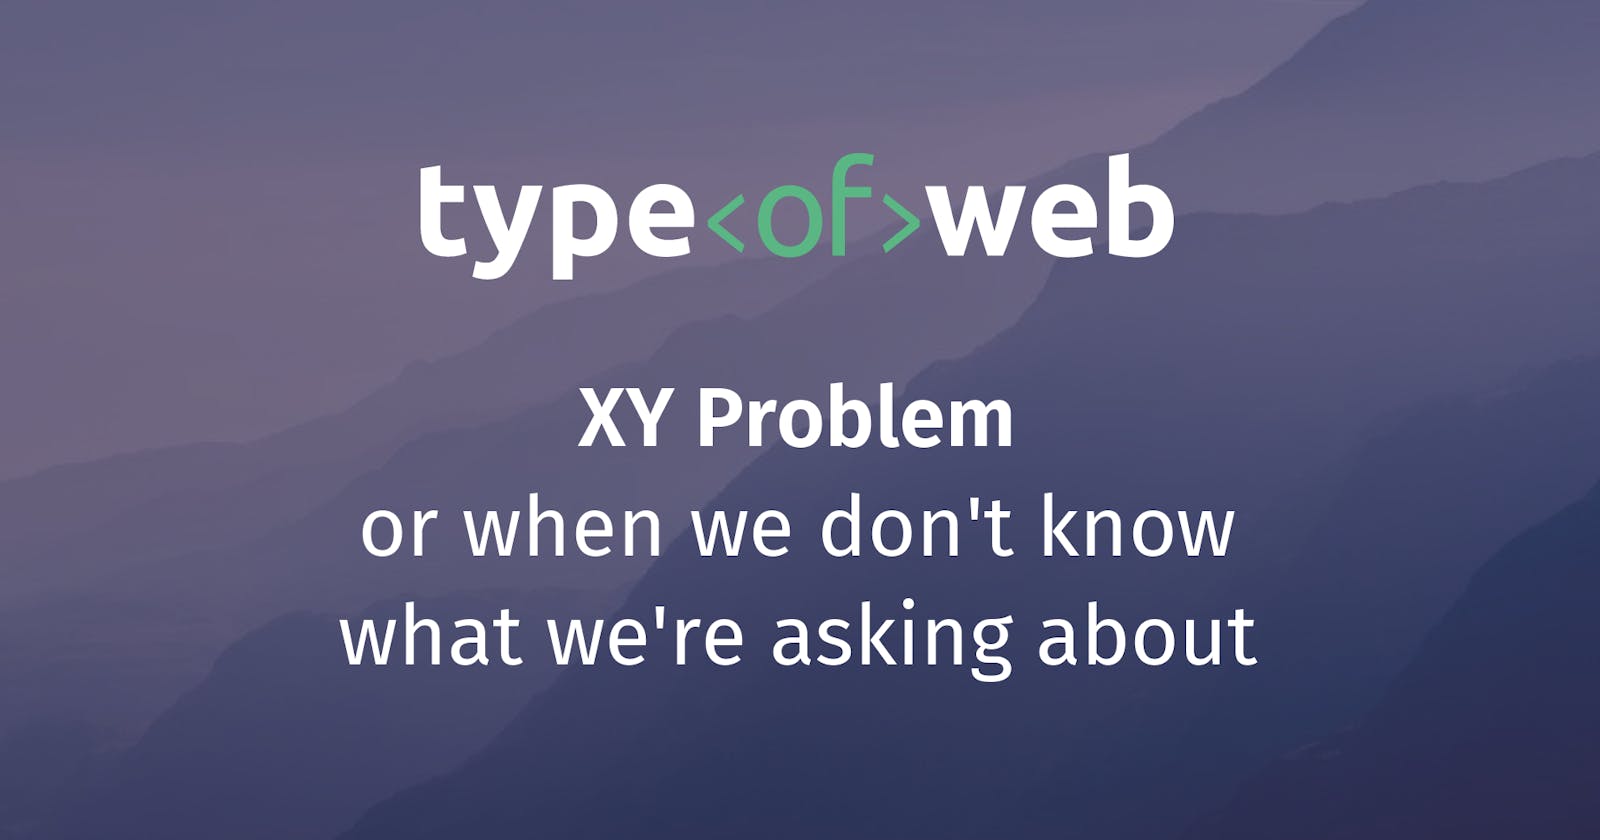 XY Problem – or when we don't know what we're asking about